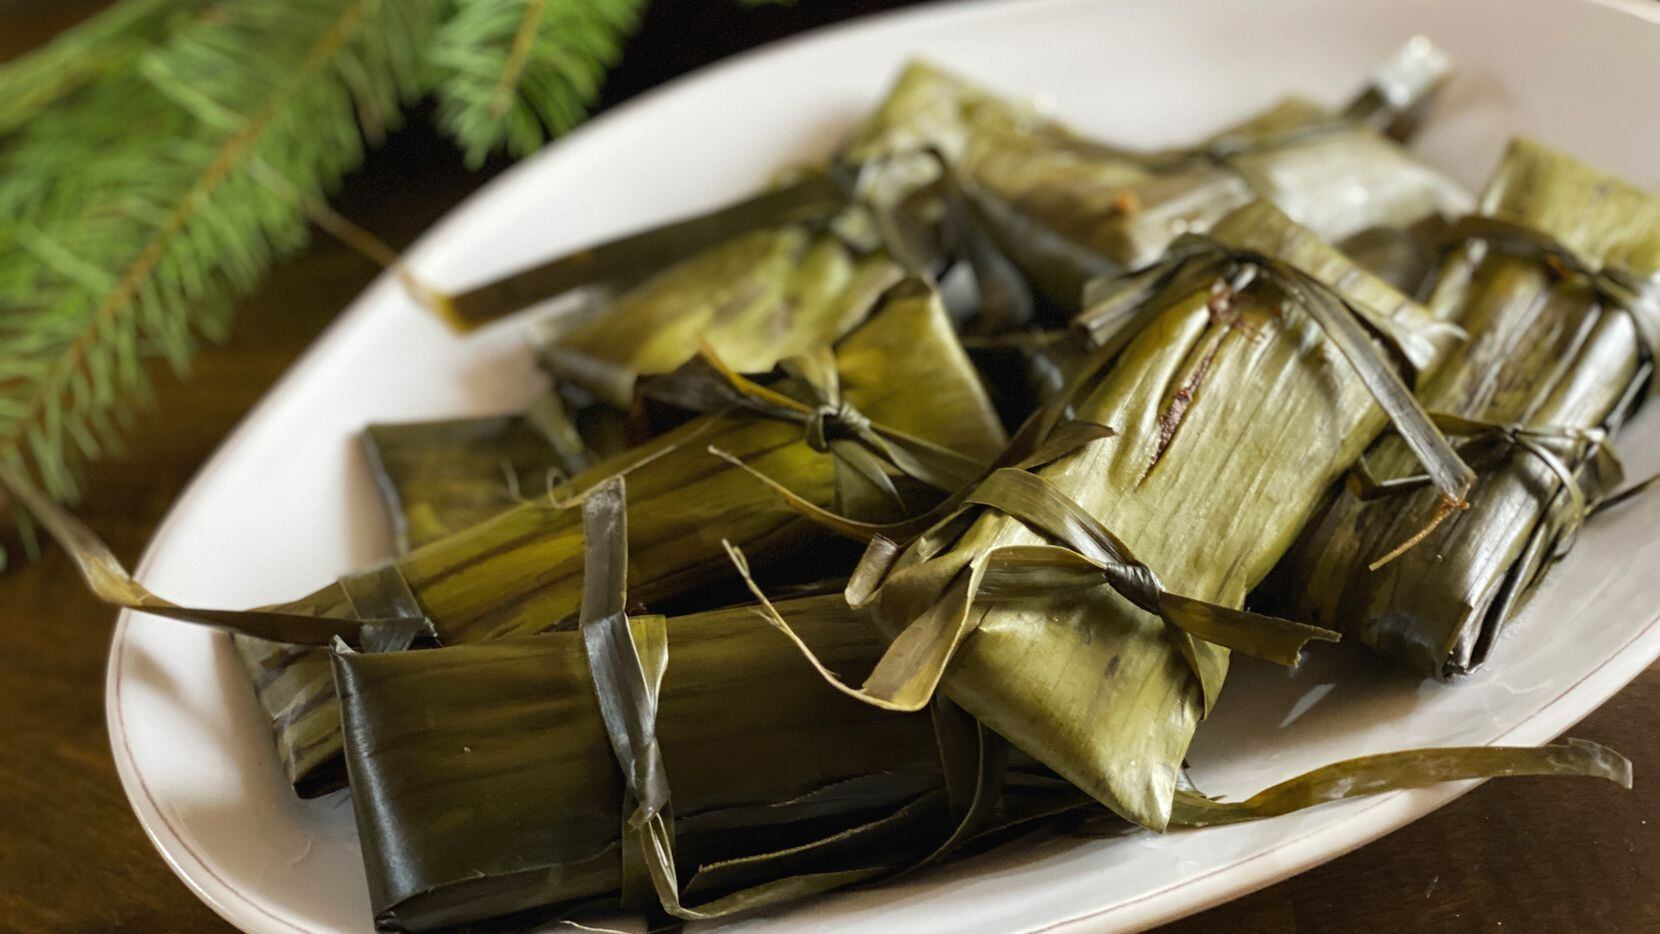 Duck Tamales from chef Olivia Lopez